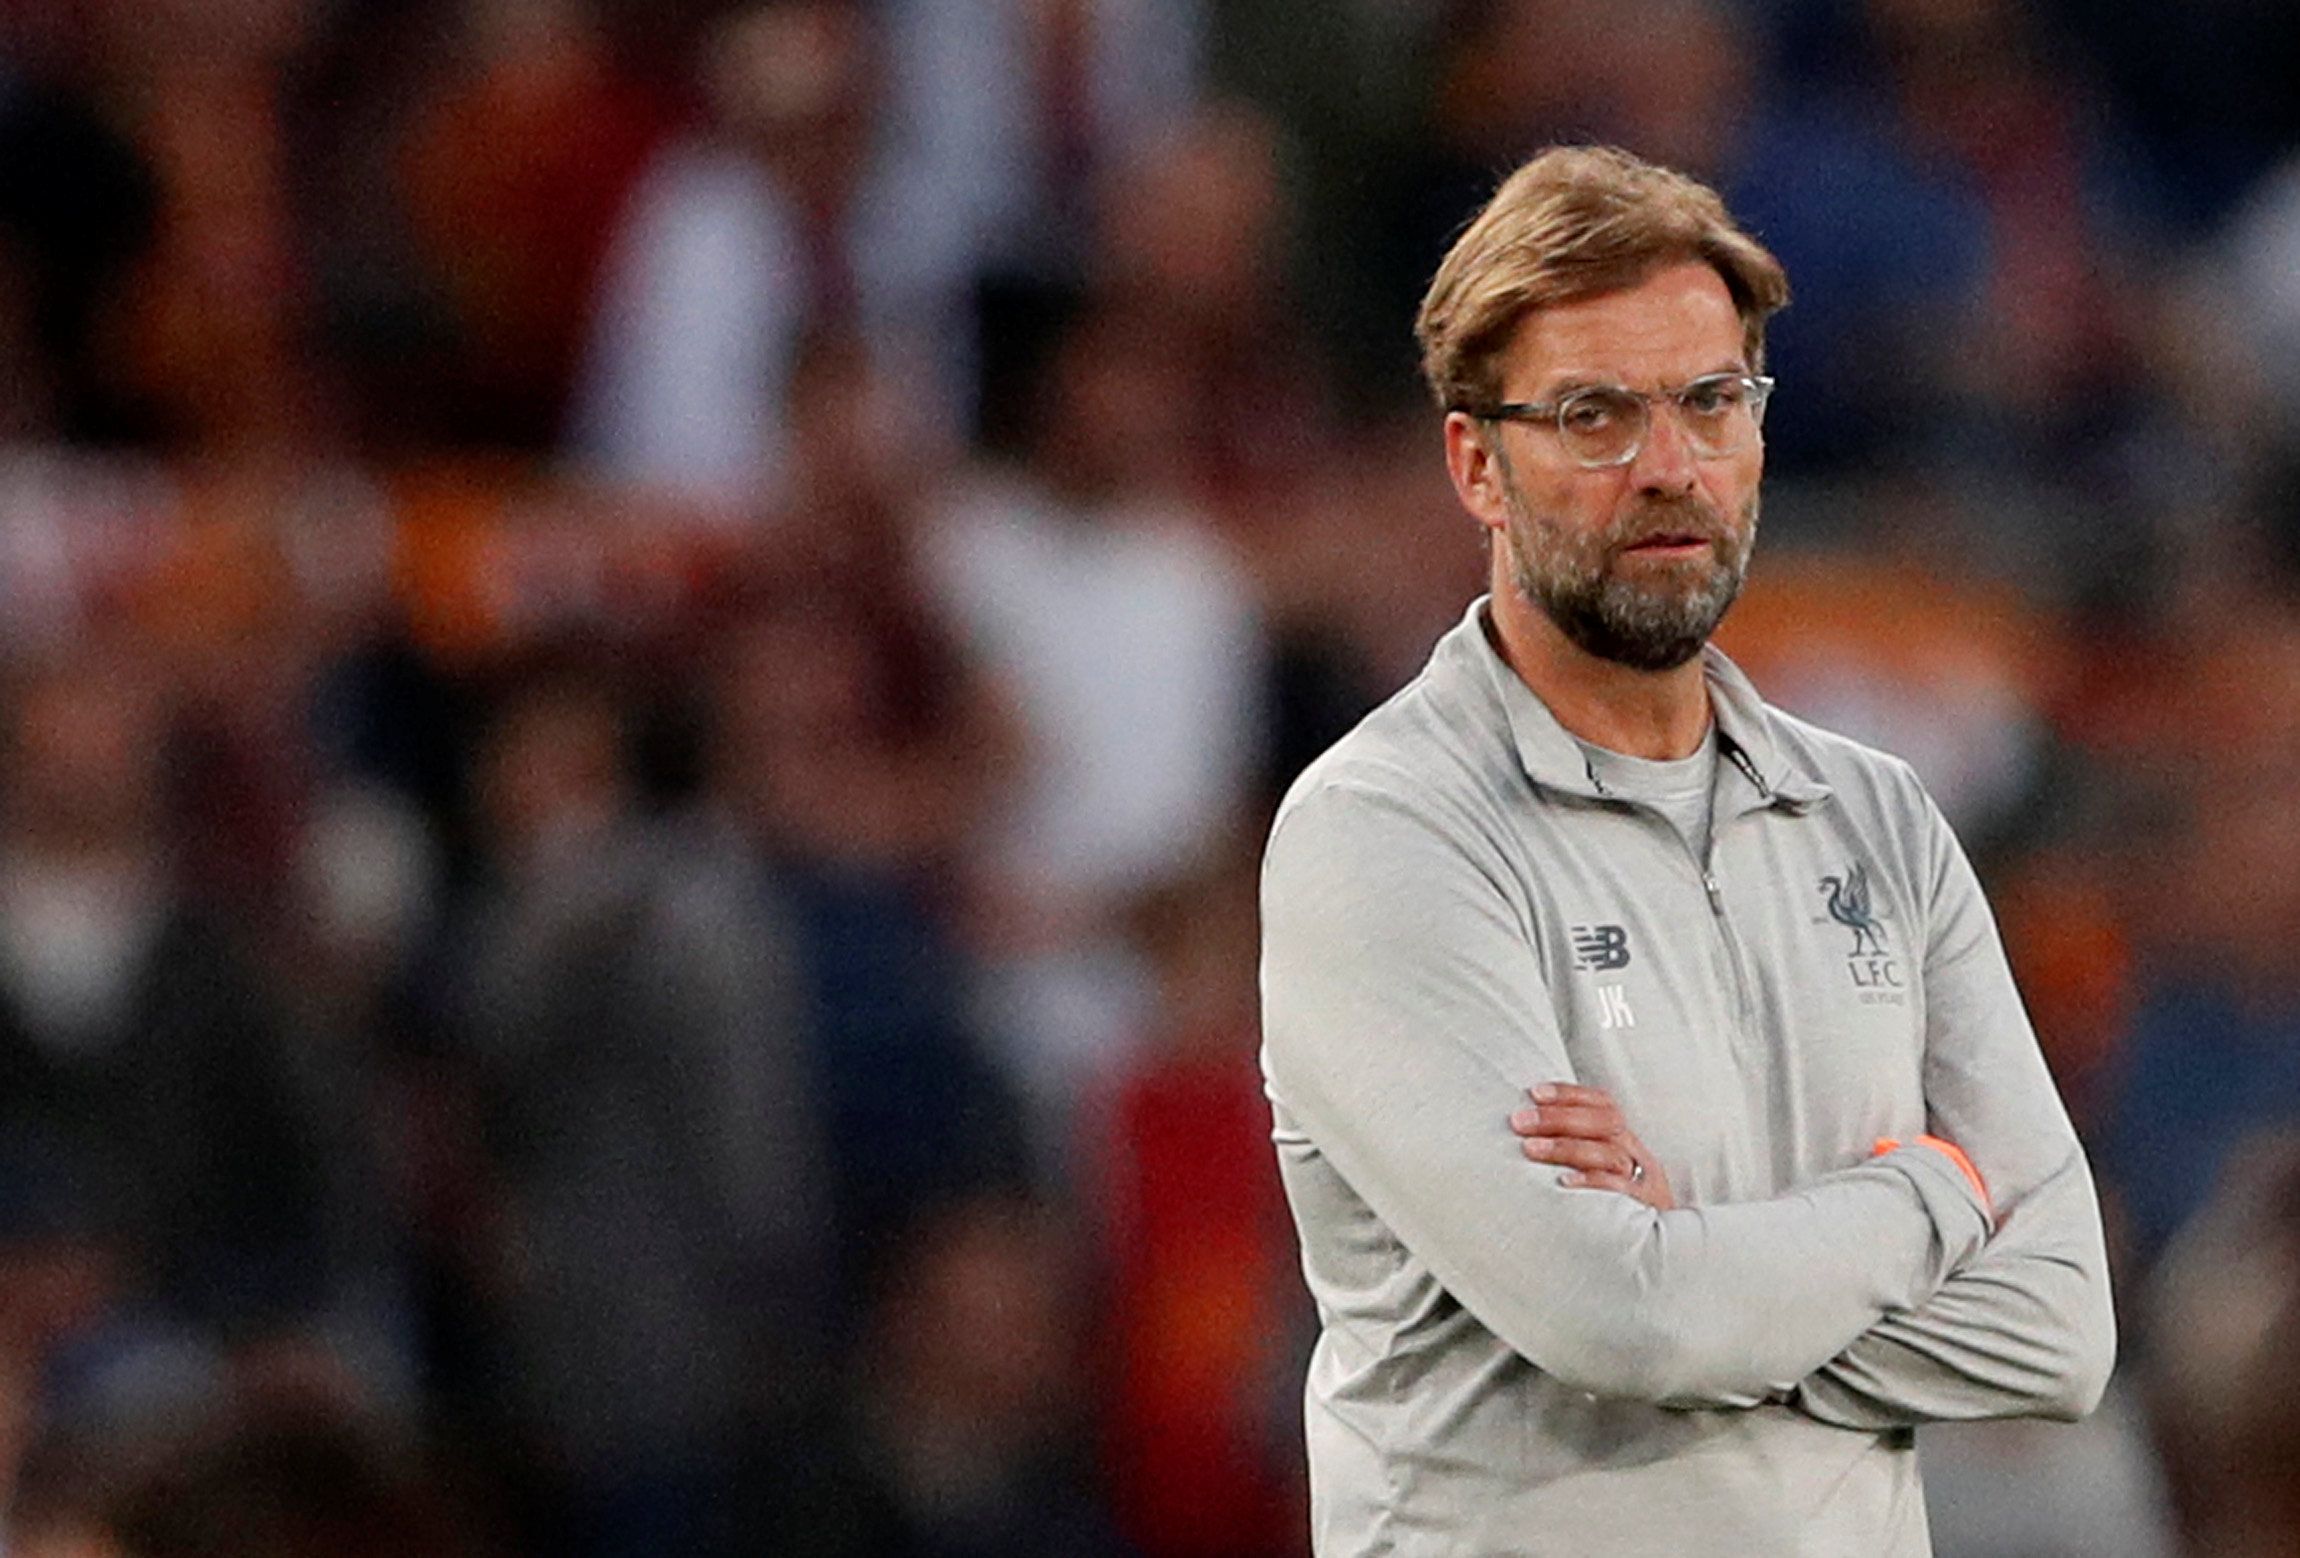 Soccer Football - Champions League Semi Final Second Leg - AS Roma v Liverpool - Stadio Olimpico, Rome, Italy - May 2, 2018  Liverpool manager Juergen Klopp during the warm up before the match   Action Images via Reuters/John Sibley